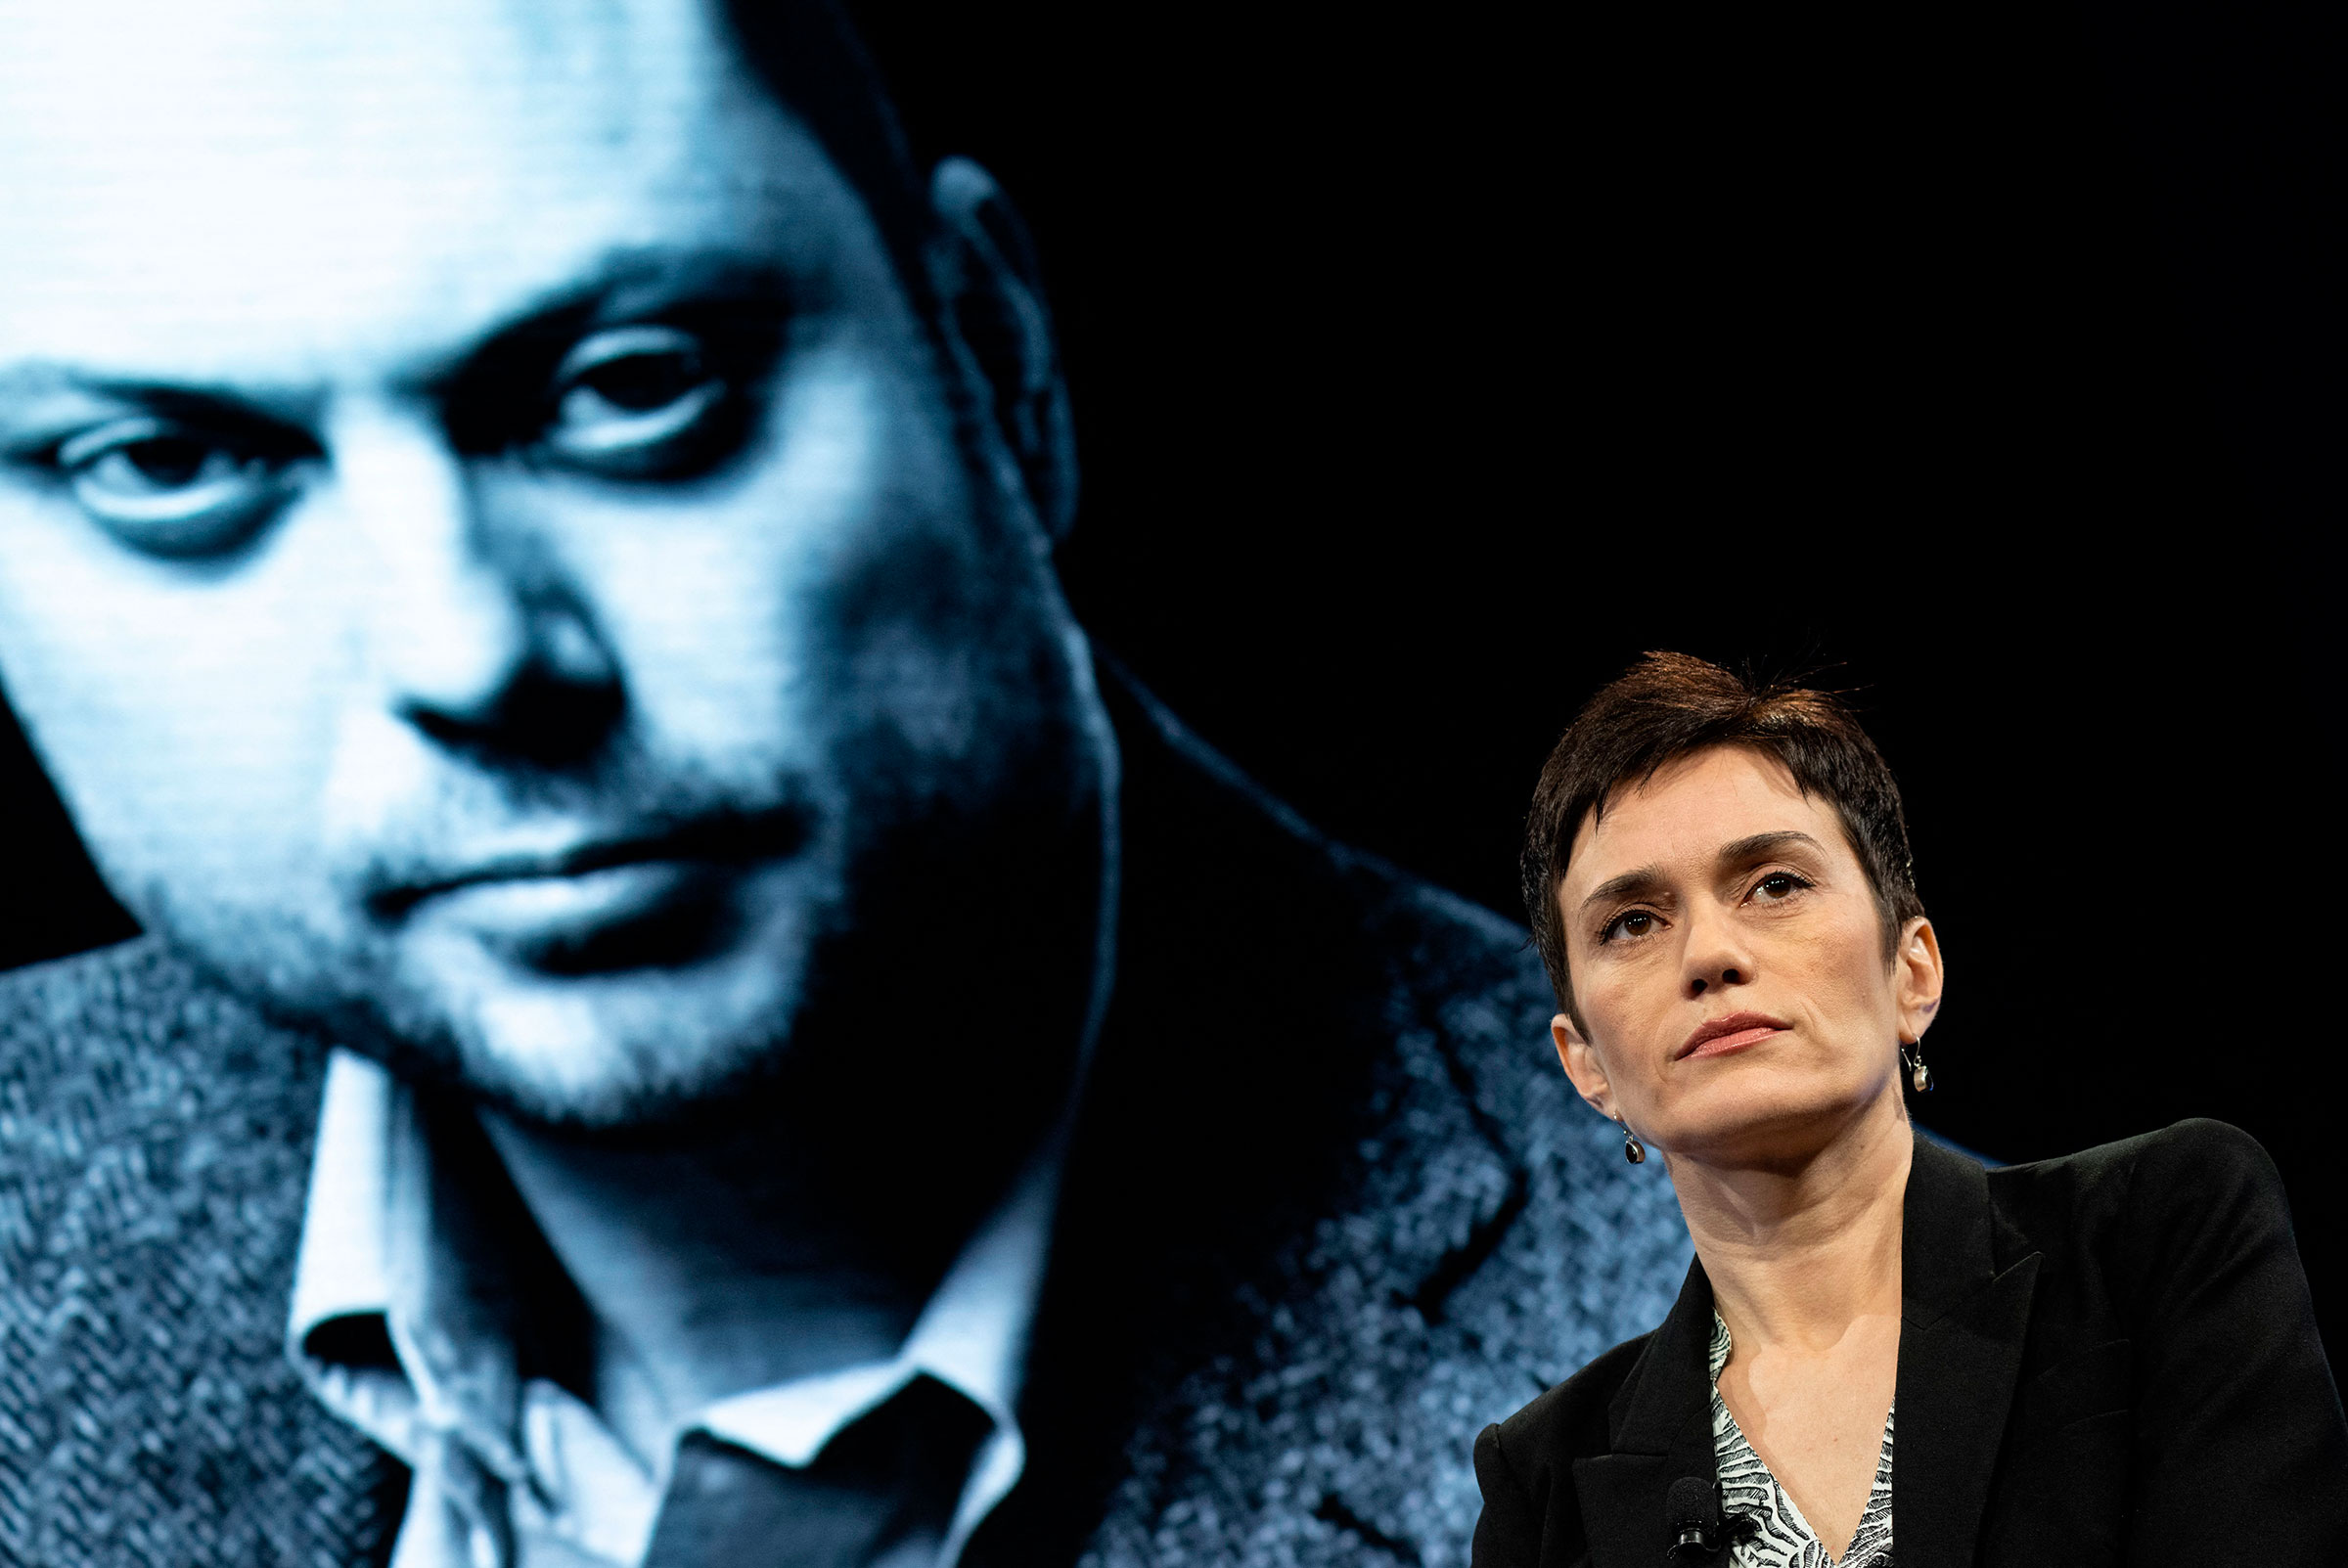 Evgenia Kara-Murza, wife of imprisoned political activist in Russia, Vladimir Kara-Murza, looks on during a discussion at the Washington Post in Washington, on April 17, 2023.